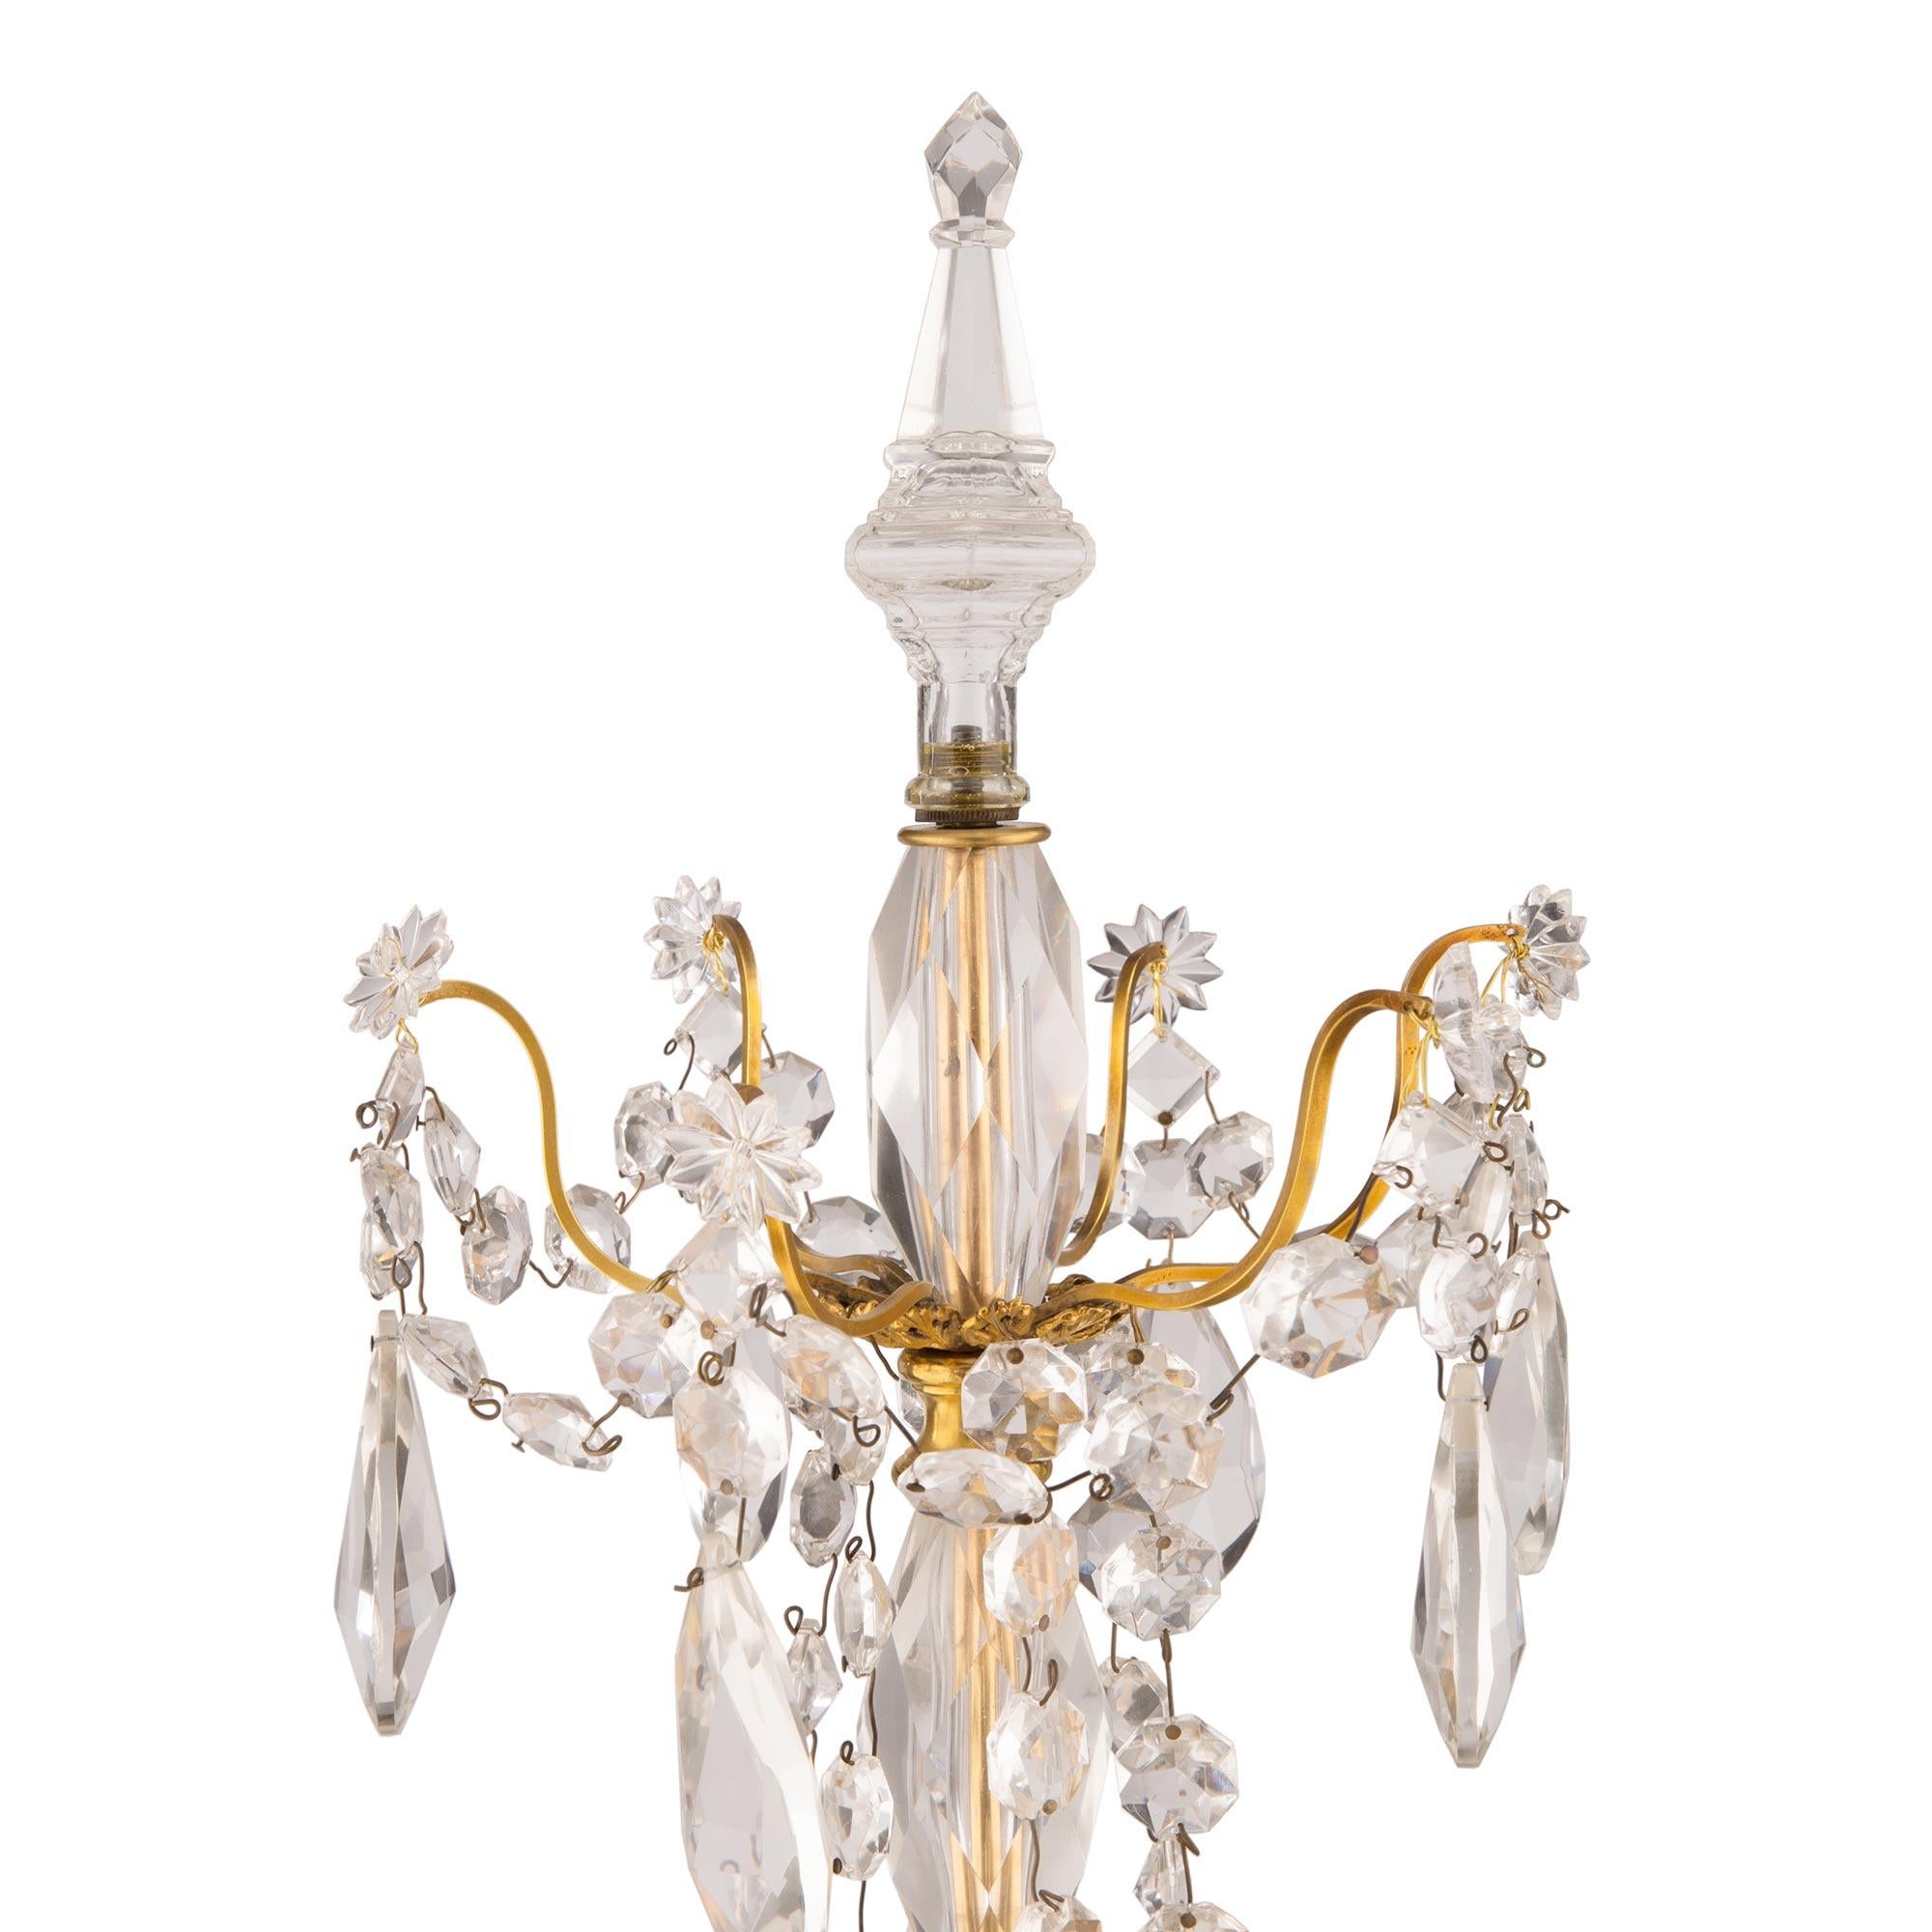 French 19th Century Louis XVI St. Ormolu and Baccarat Crystal Girandole Lamp In Good Condition For Sale In West Palm Beach, FL